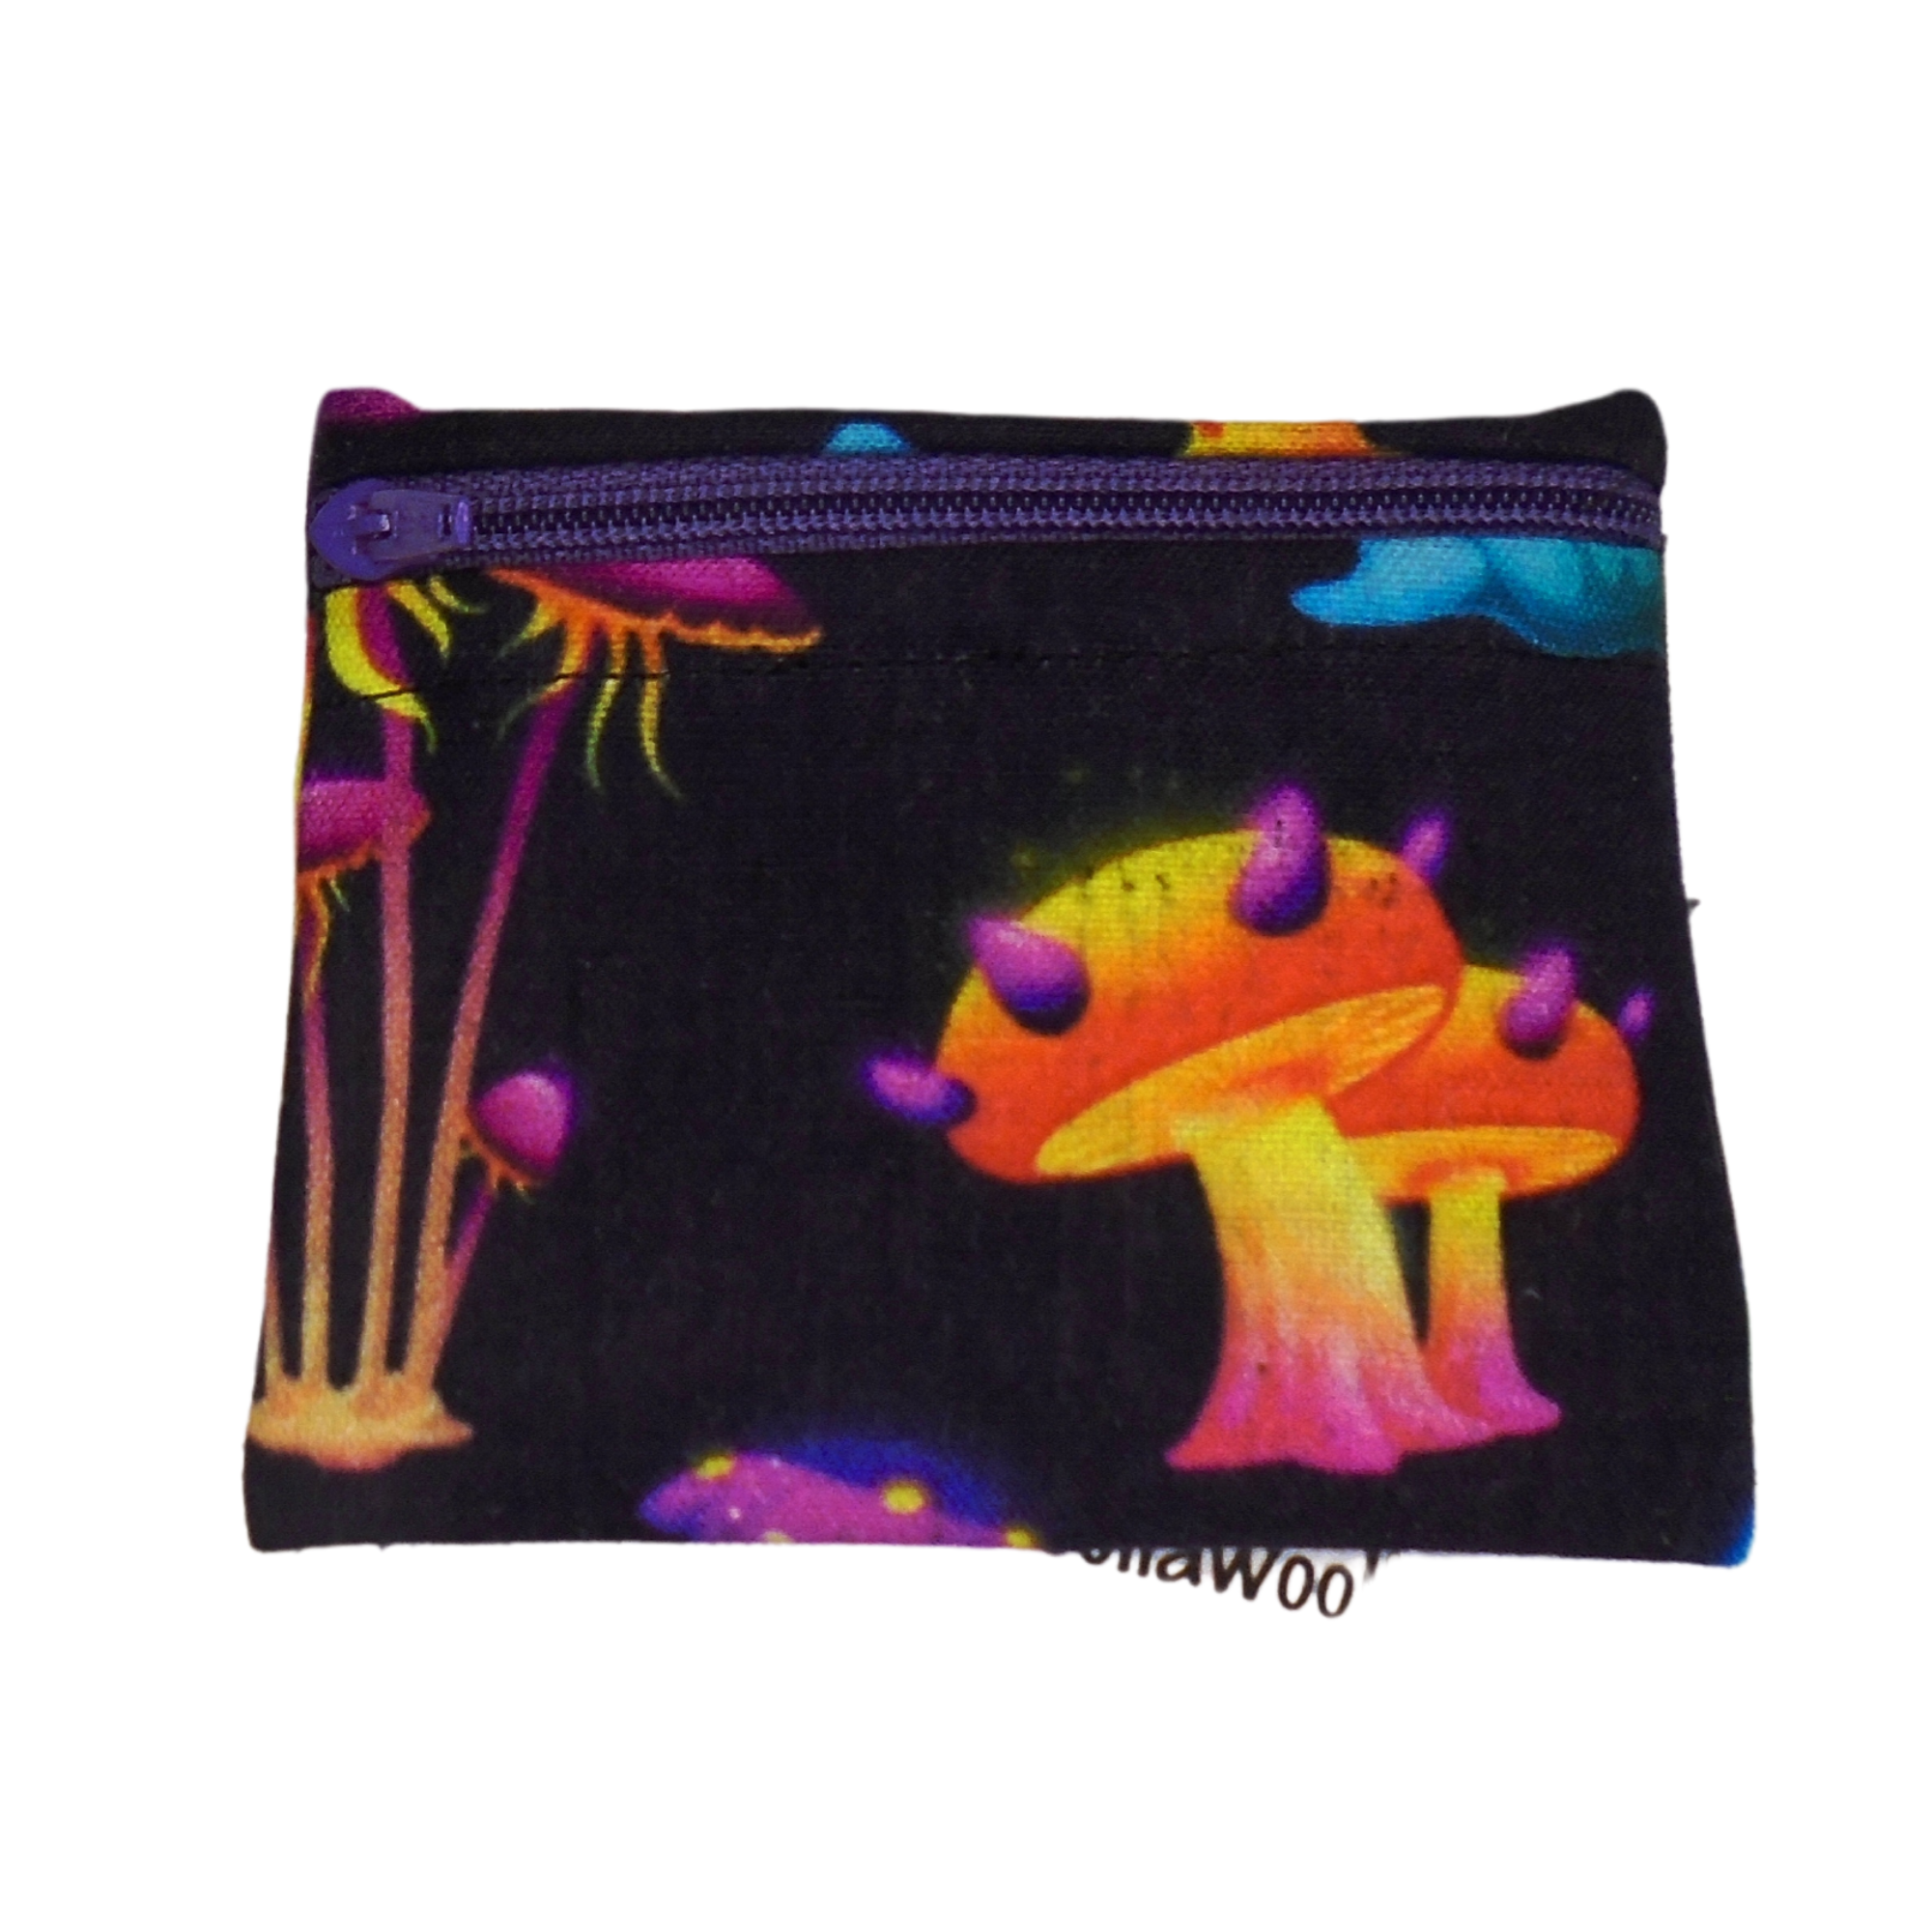 Midnight Mushroom - Snack Bag - Small Pippins Waterproof Pouch for Food, Makeup and more, Eco-Friendly and Washable Lunch, Travel, and Storage